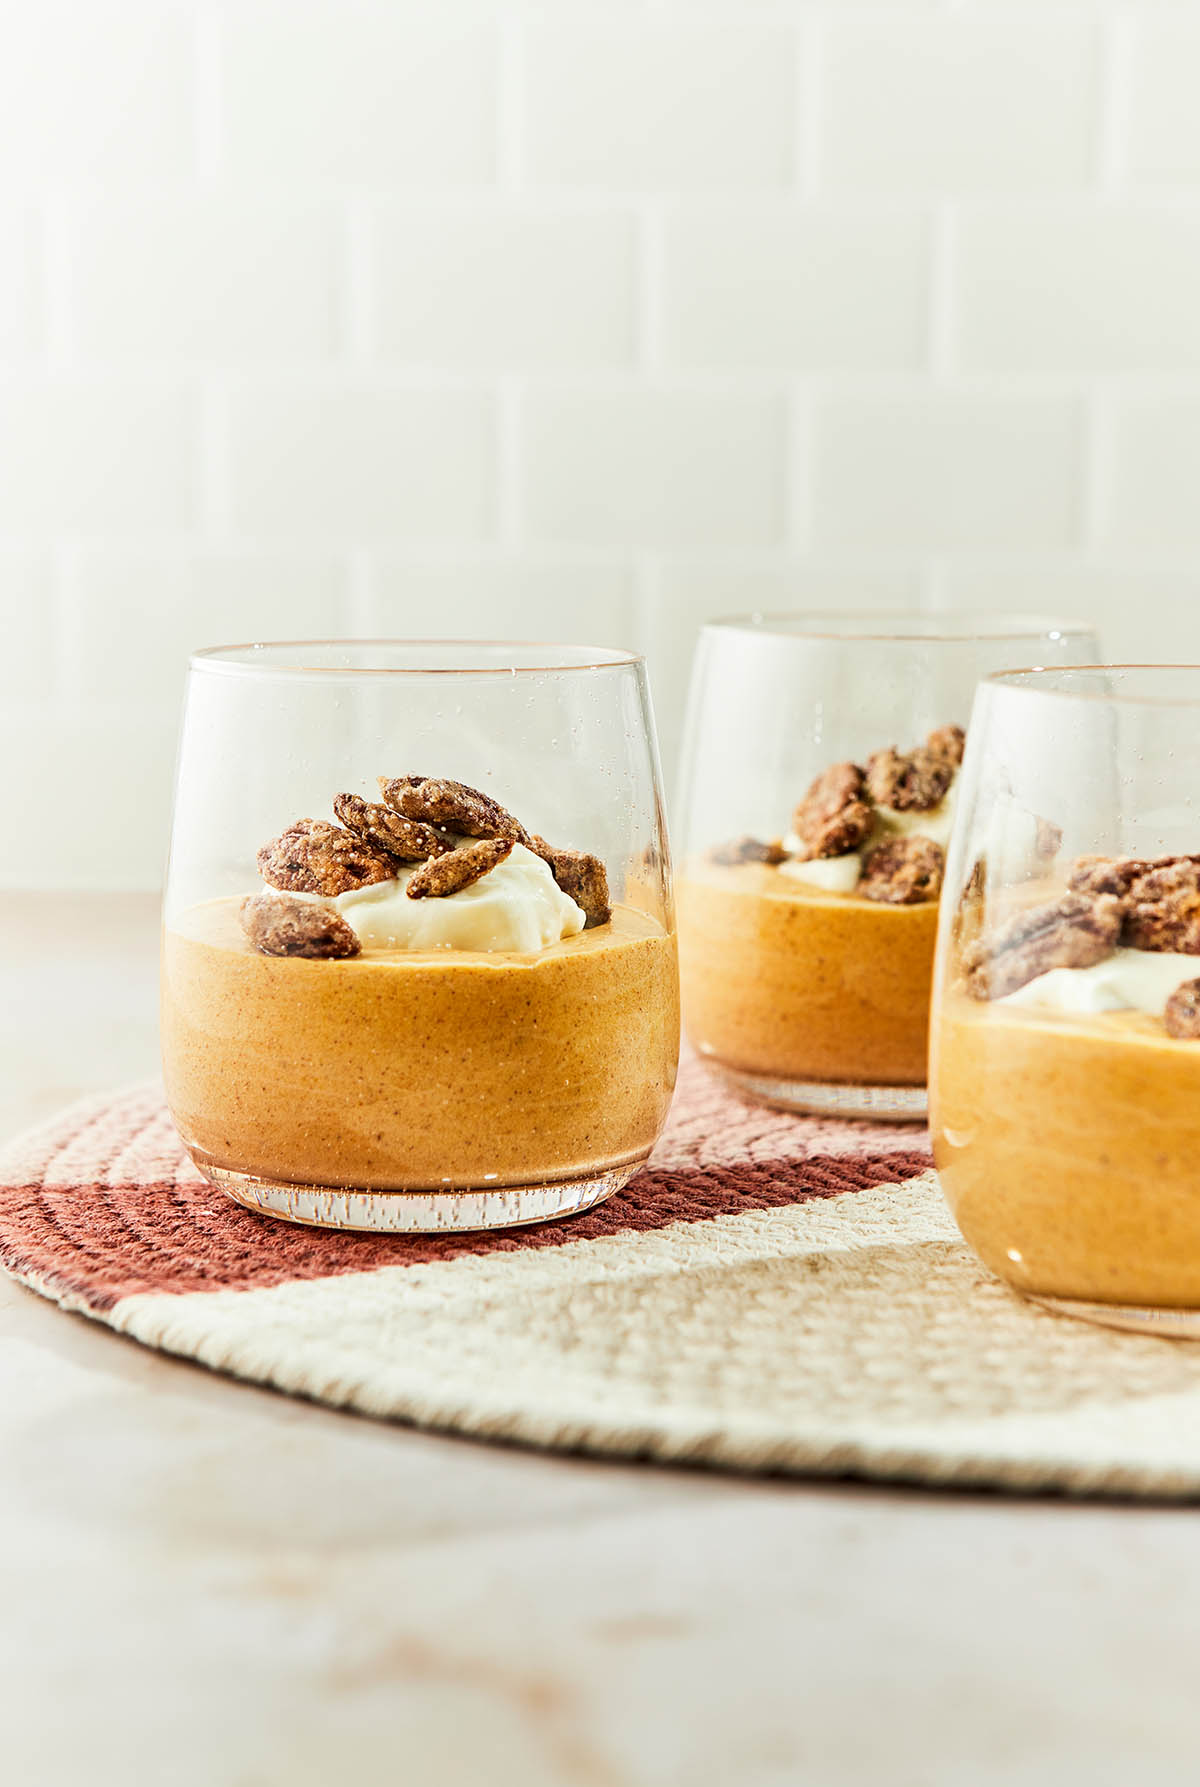 Straight on shot of three dishes of pumpkin mousse on a round placemat on a stone surface with a tiled background.